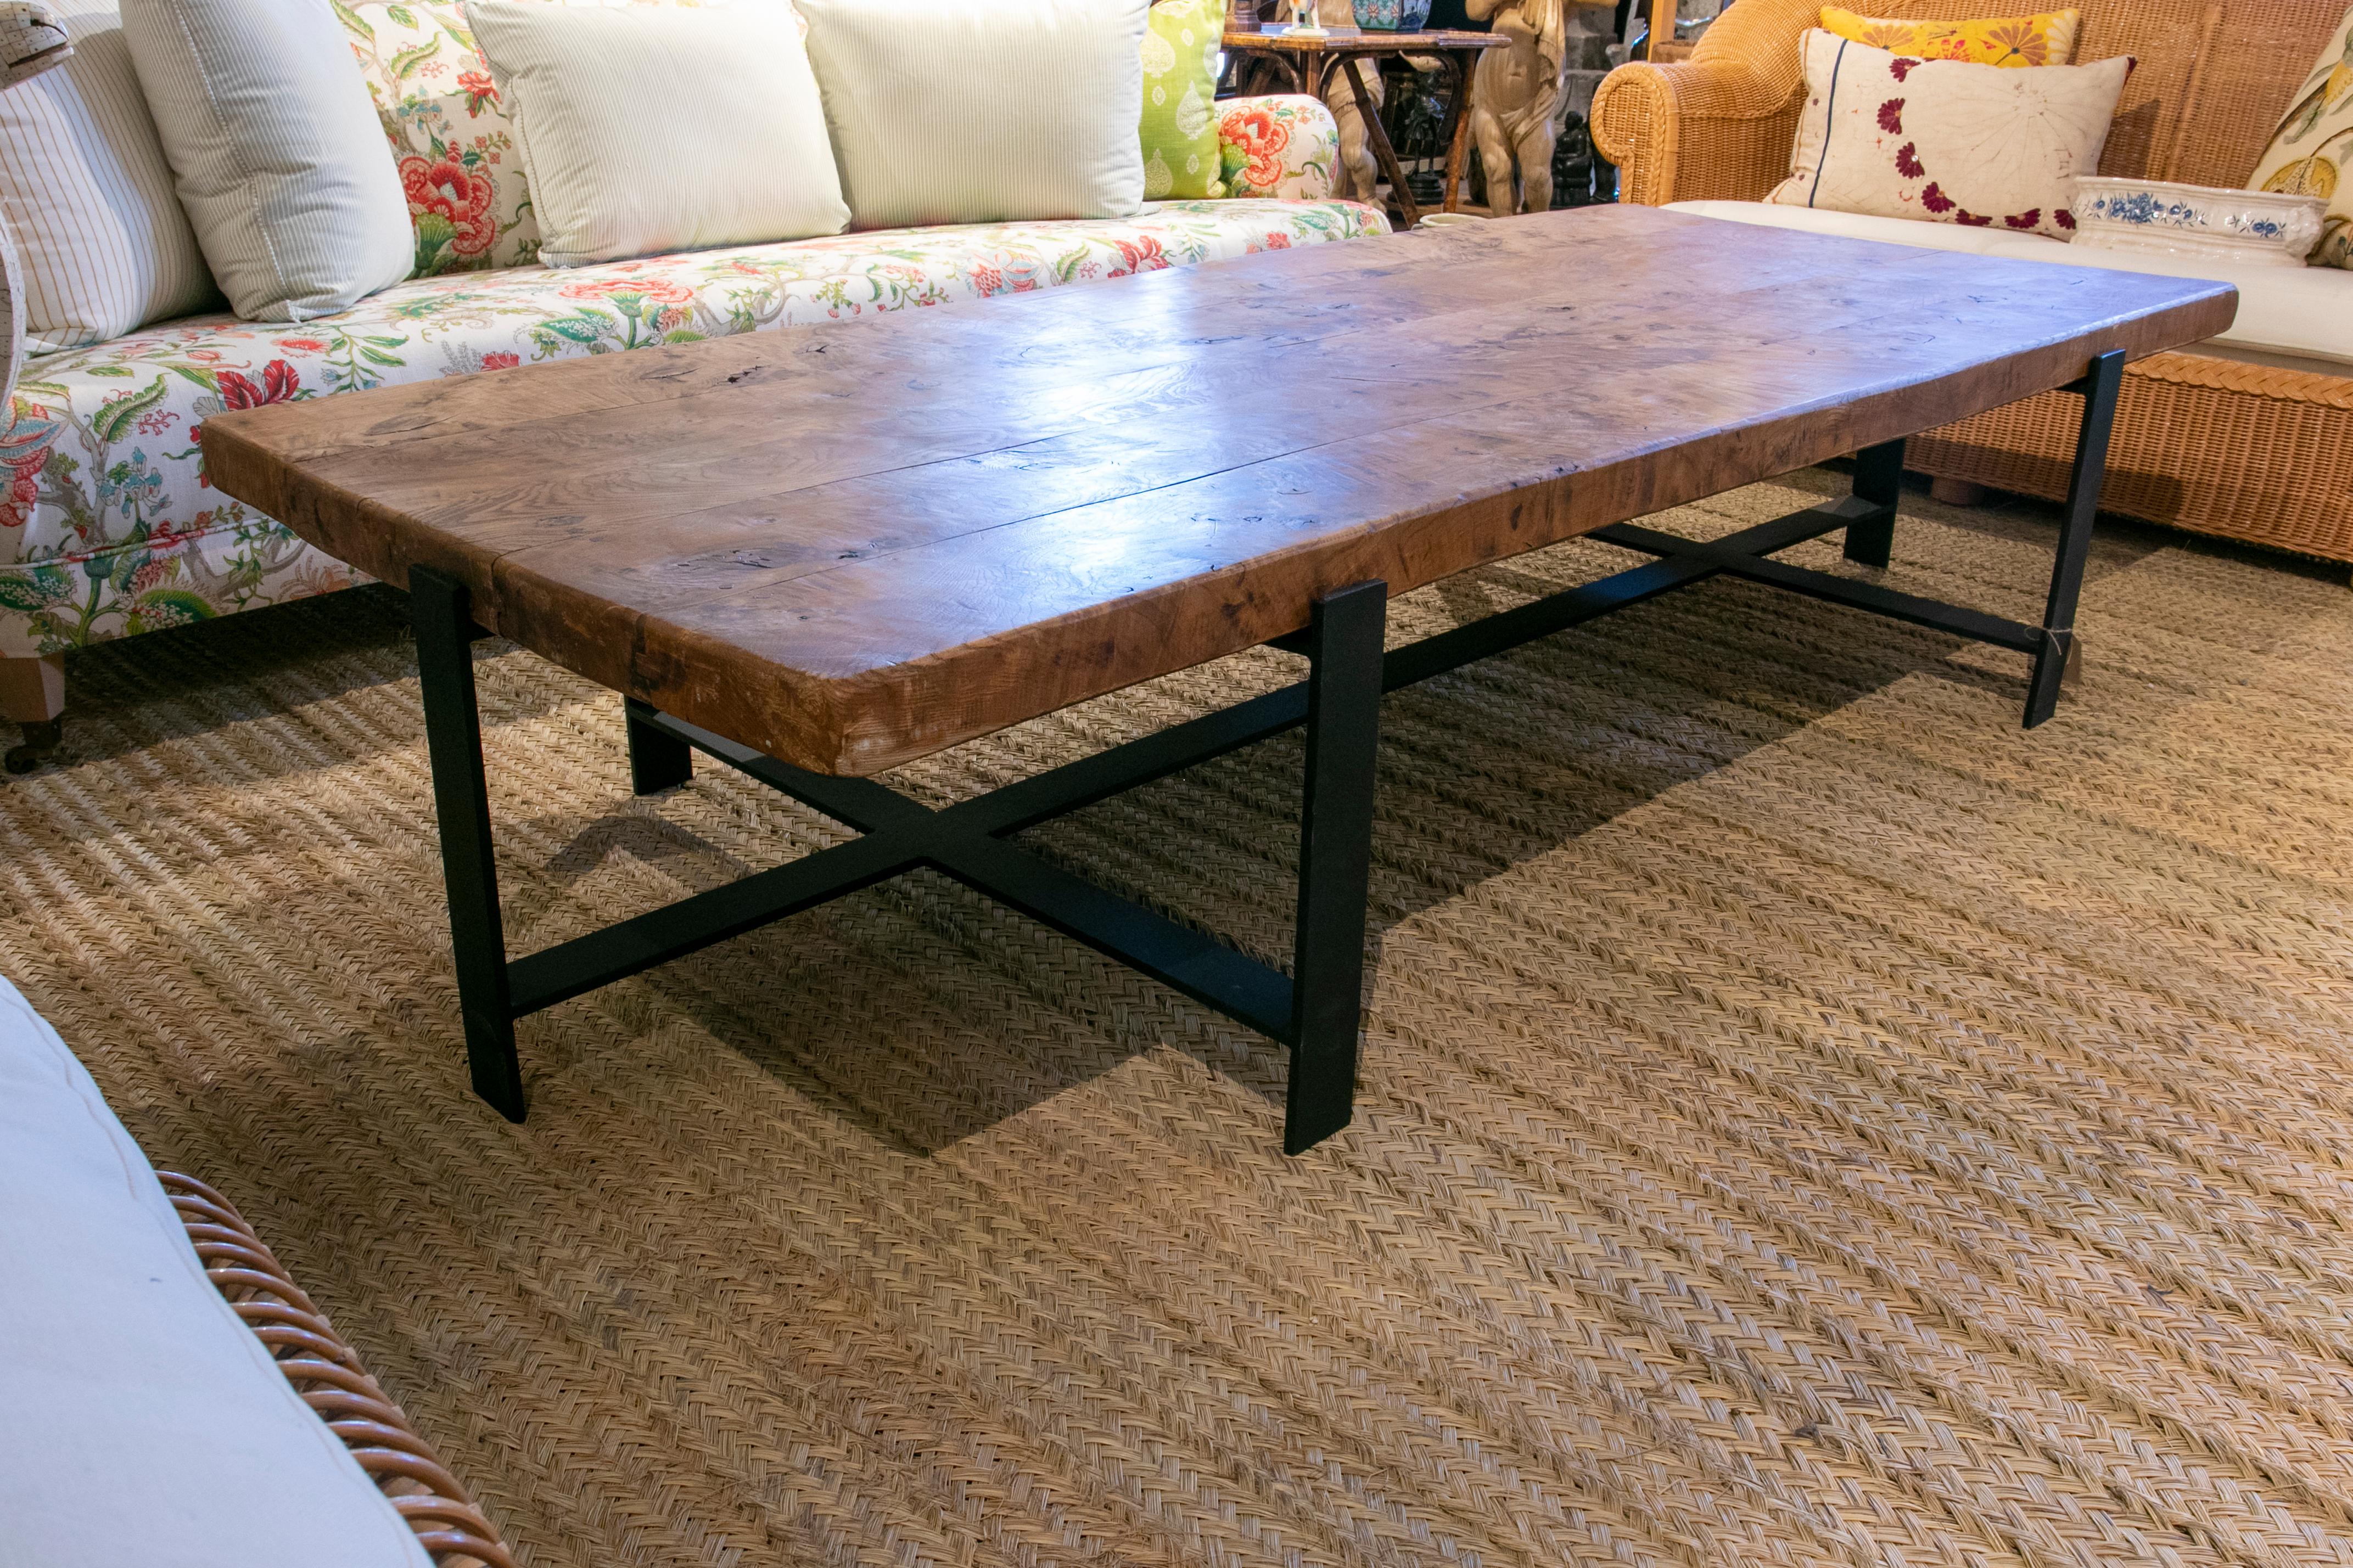 1950s coffee table with wooden table top and modern iron base.